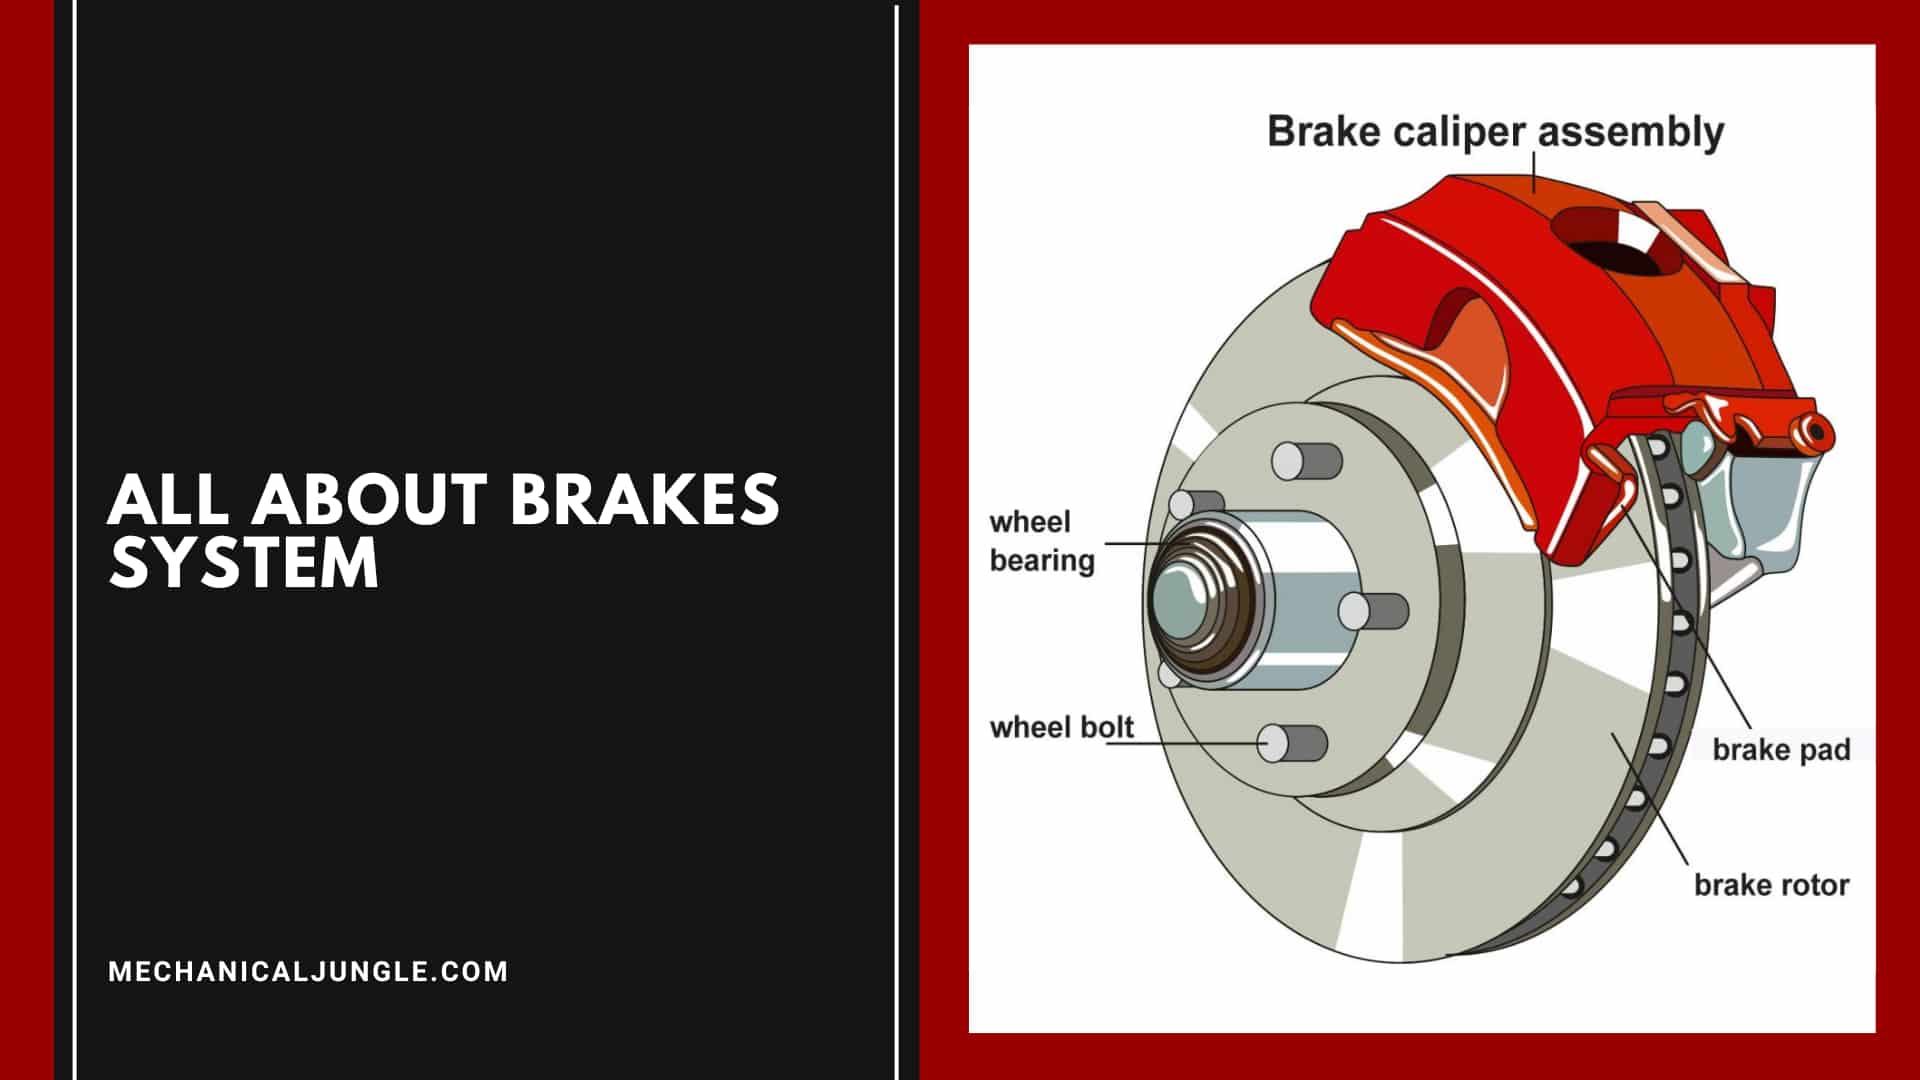 All About Brakes System